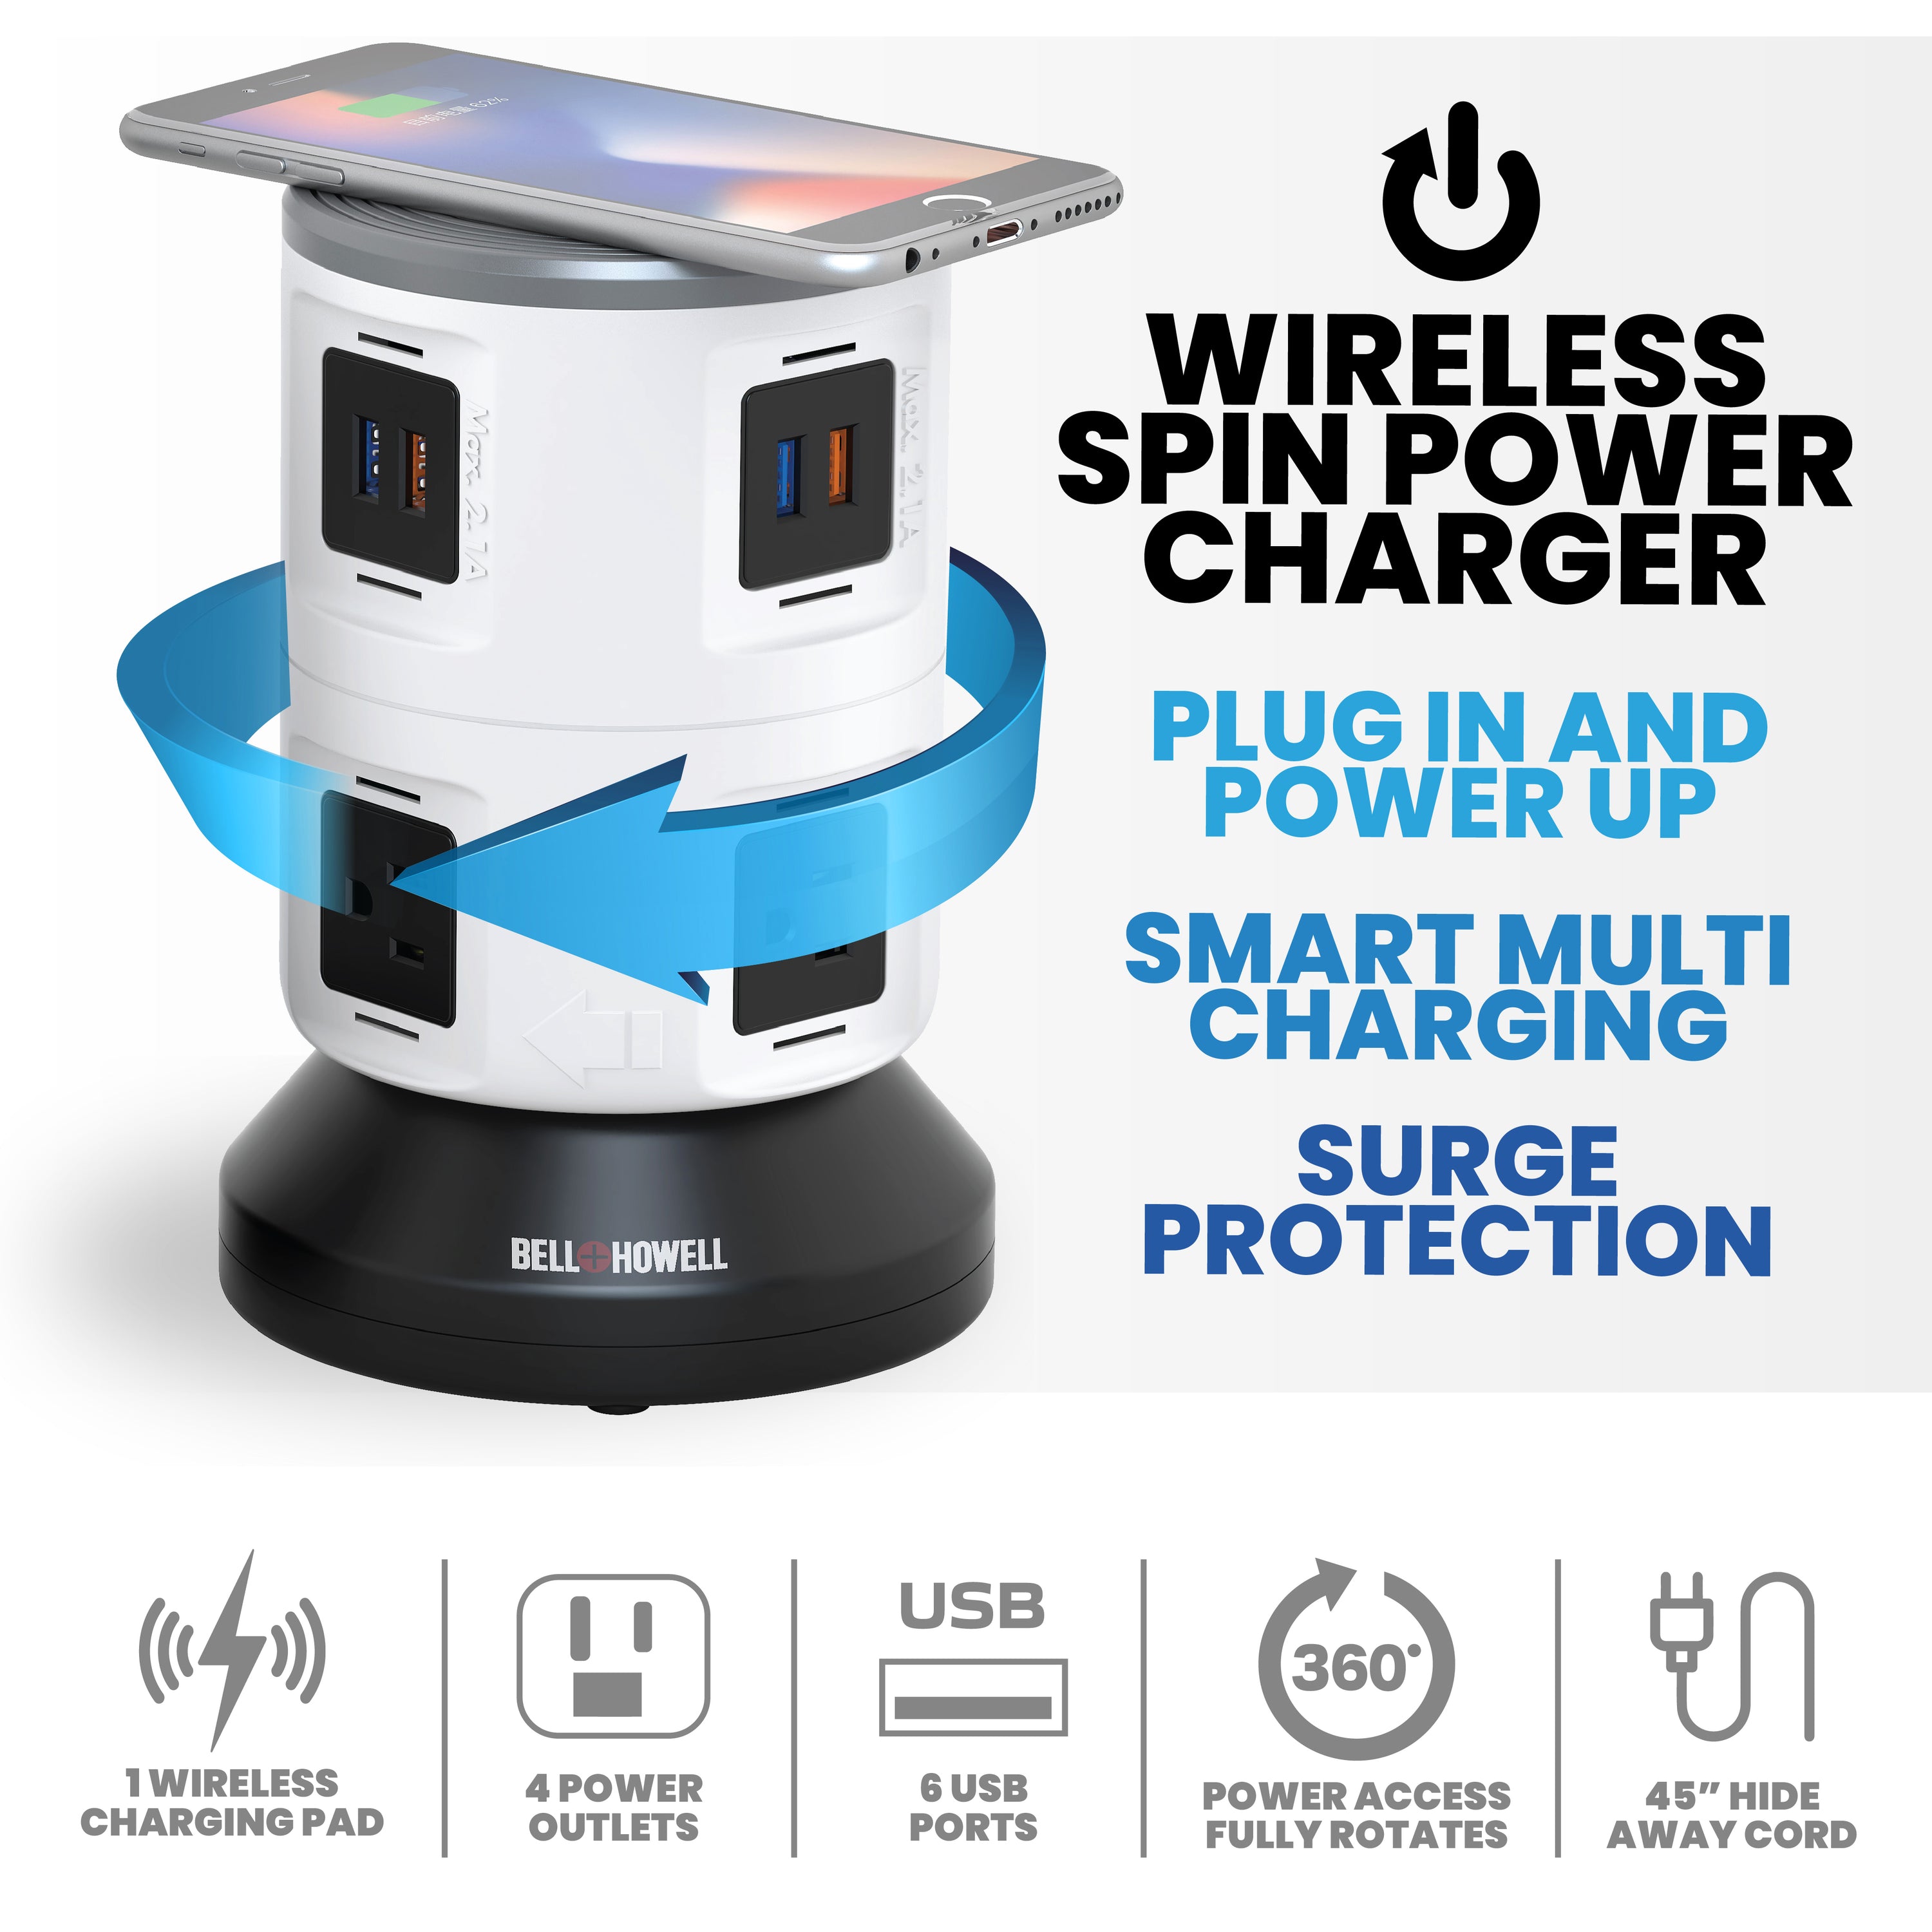 Bell + Howell Spin Power with Wireless Phone Charger